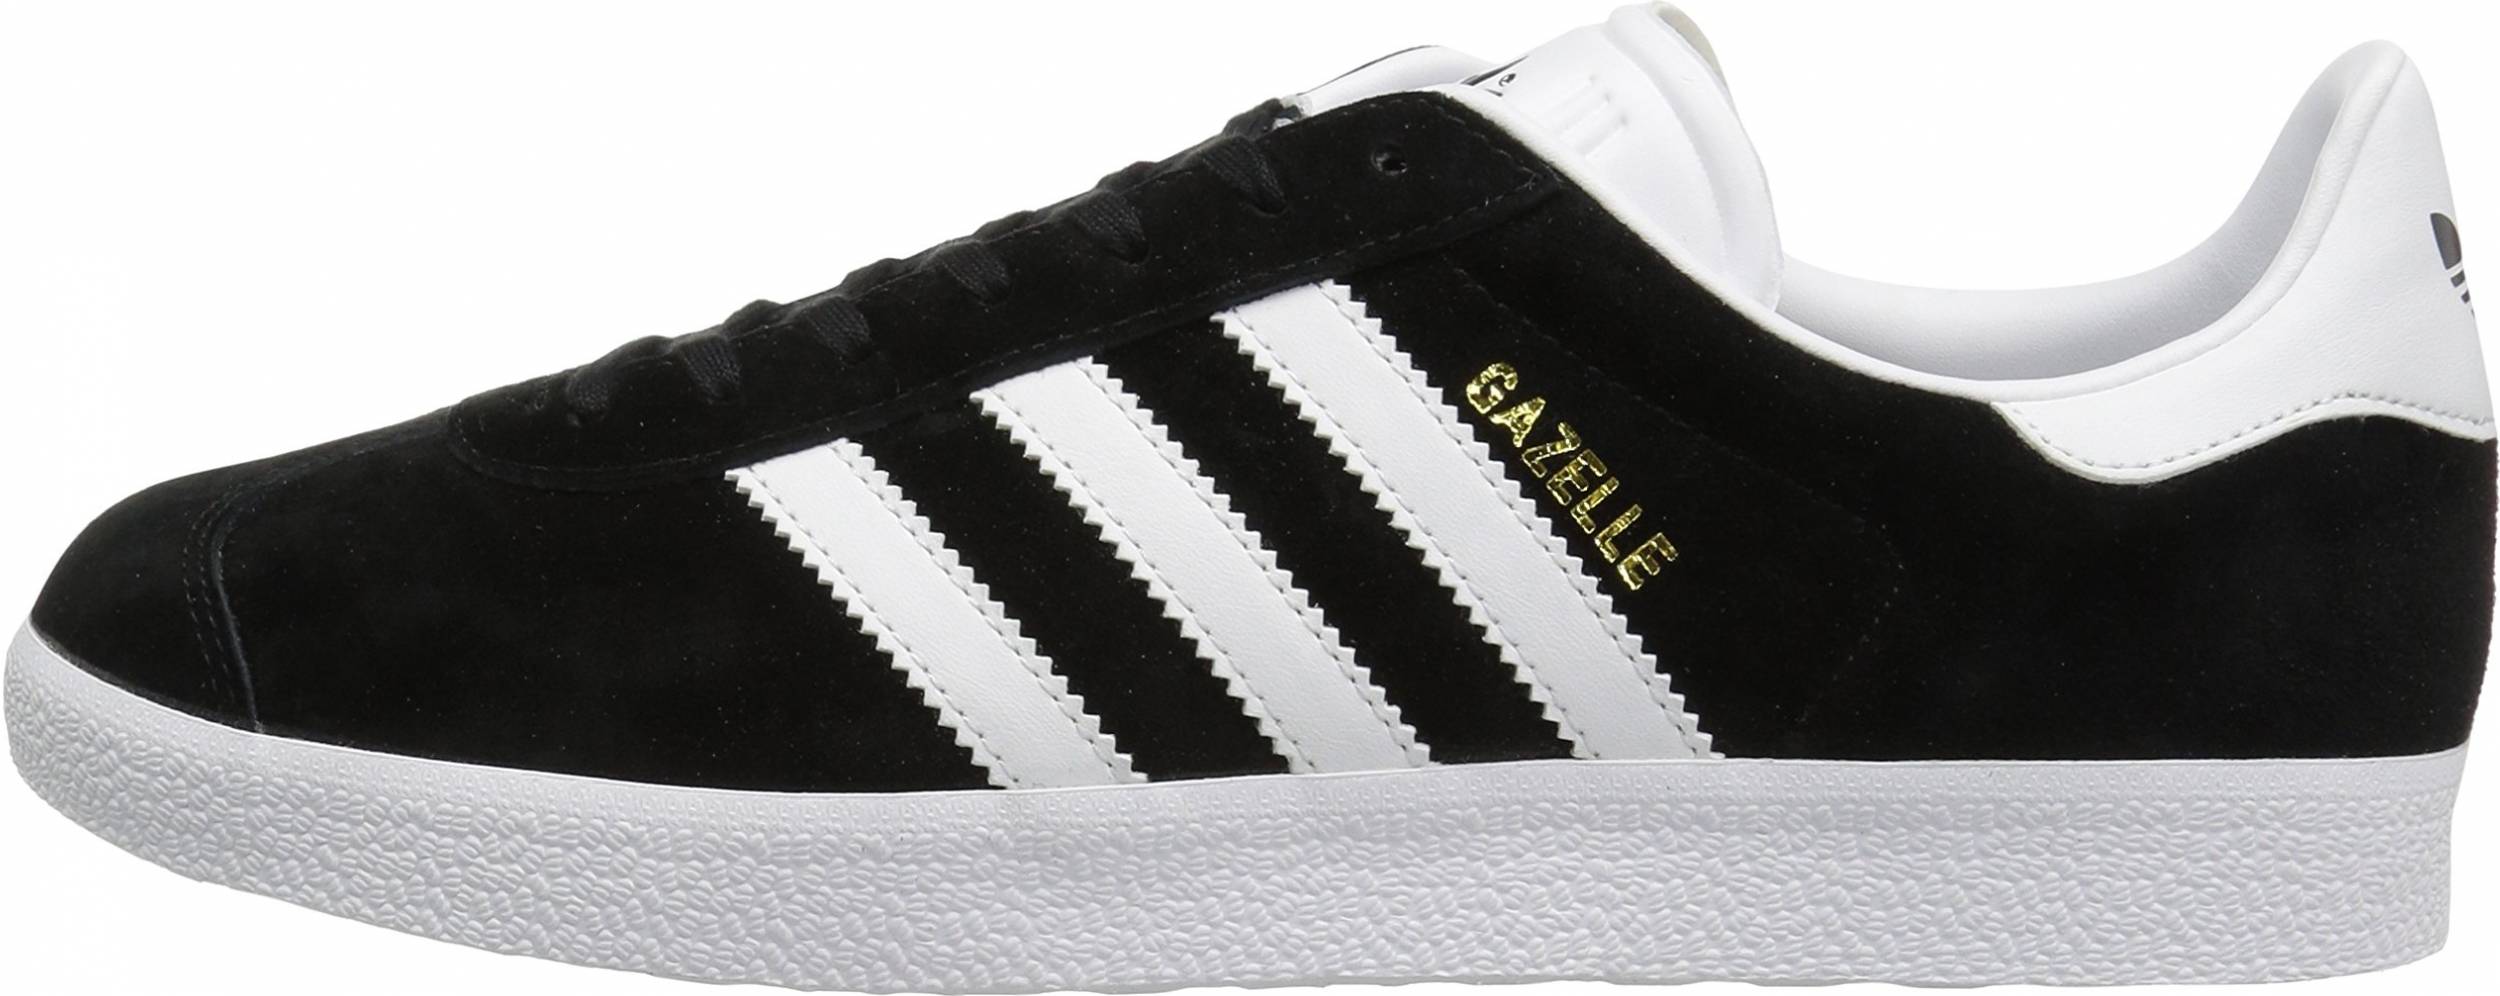 Adidas Gazelle sneakers in 50+ colors (only $39) | RunRepeat دخان تركي